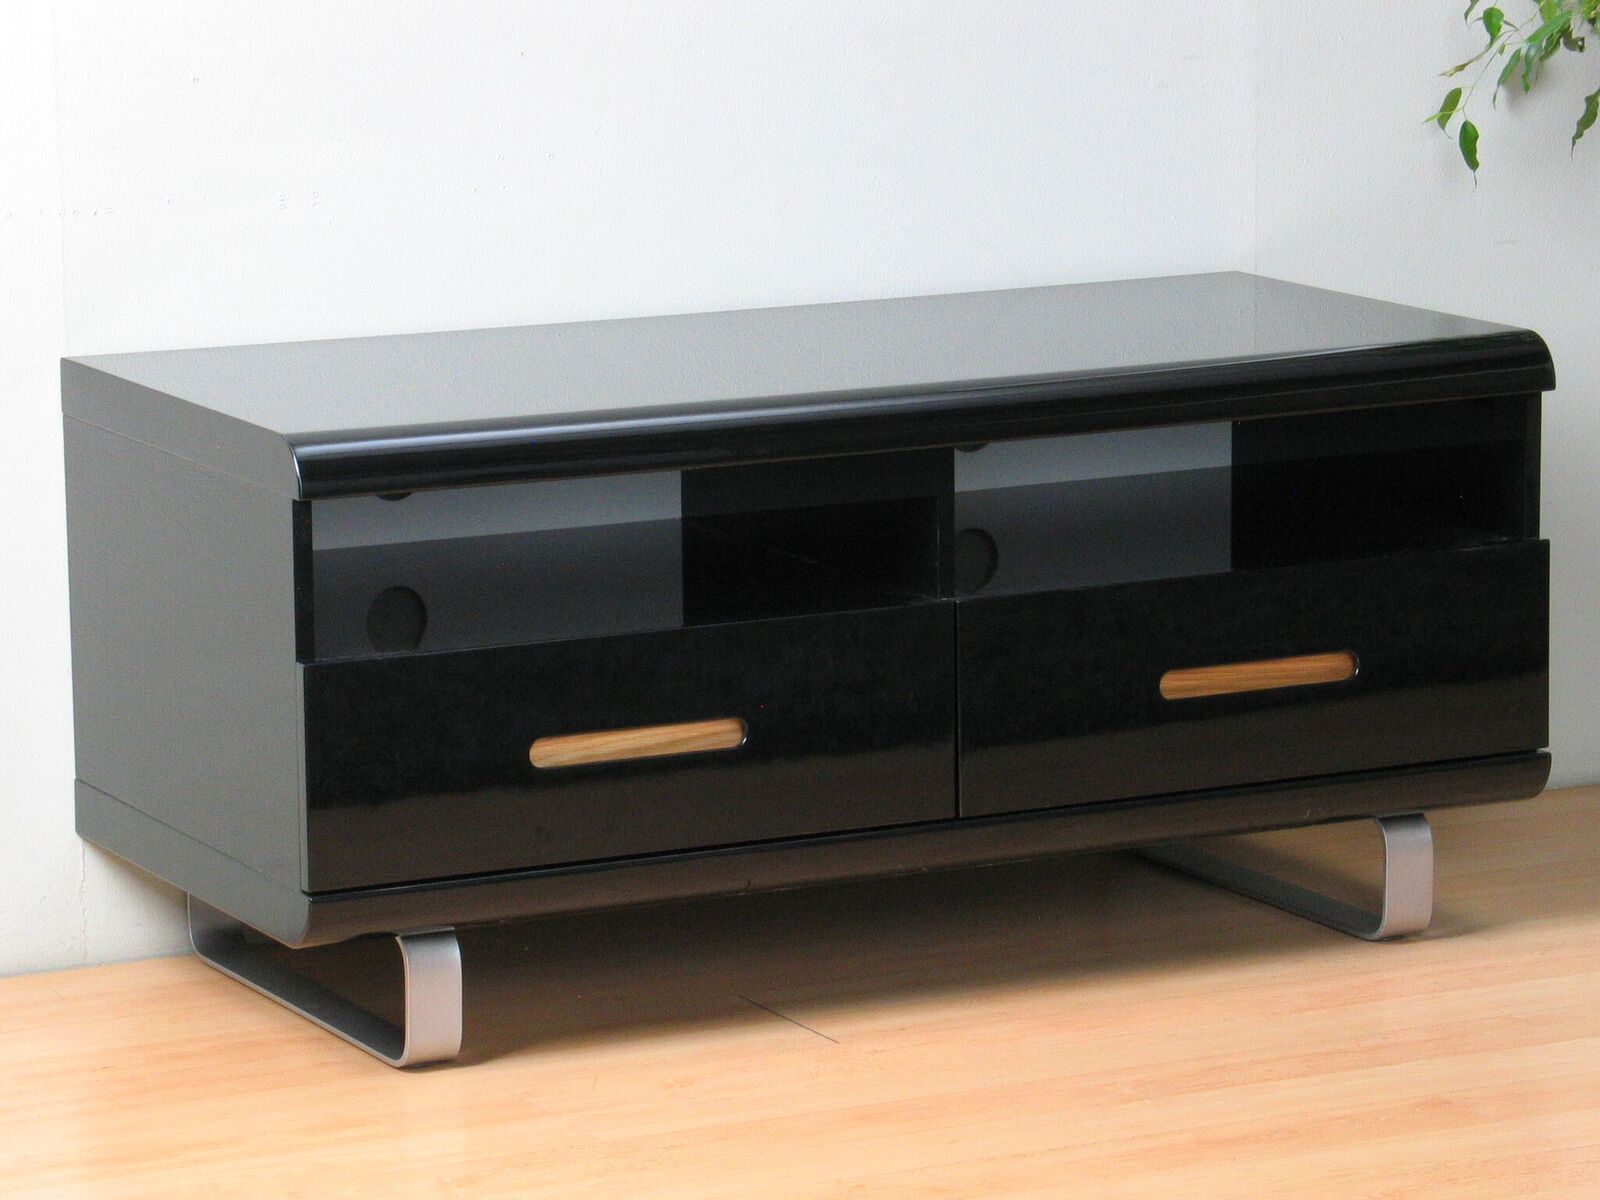 Tv Lowboard Spacy Hochglanz Schwarz Kommode Sideboard Within Stennis Sideboards (View 22 of 30)